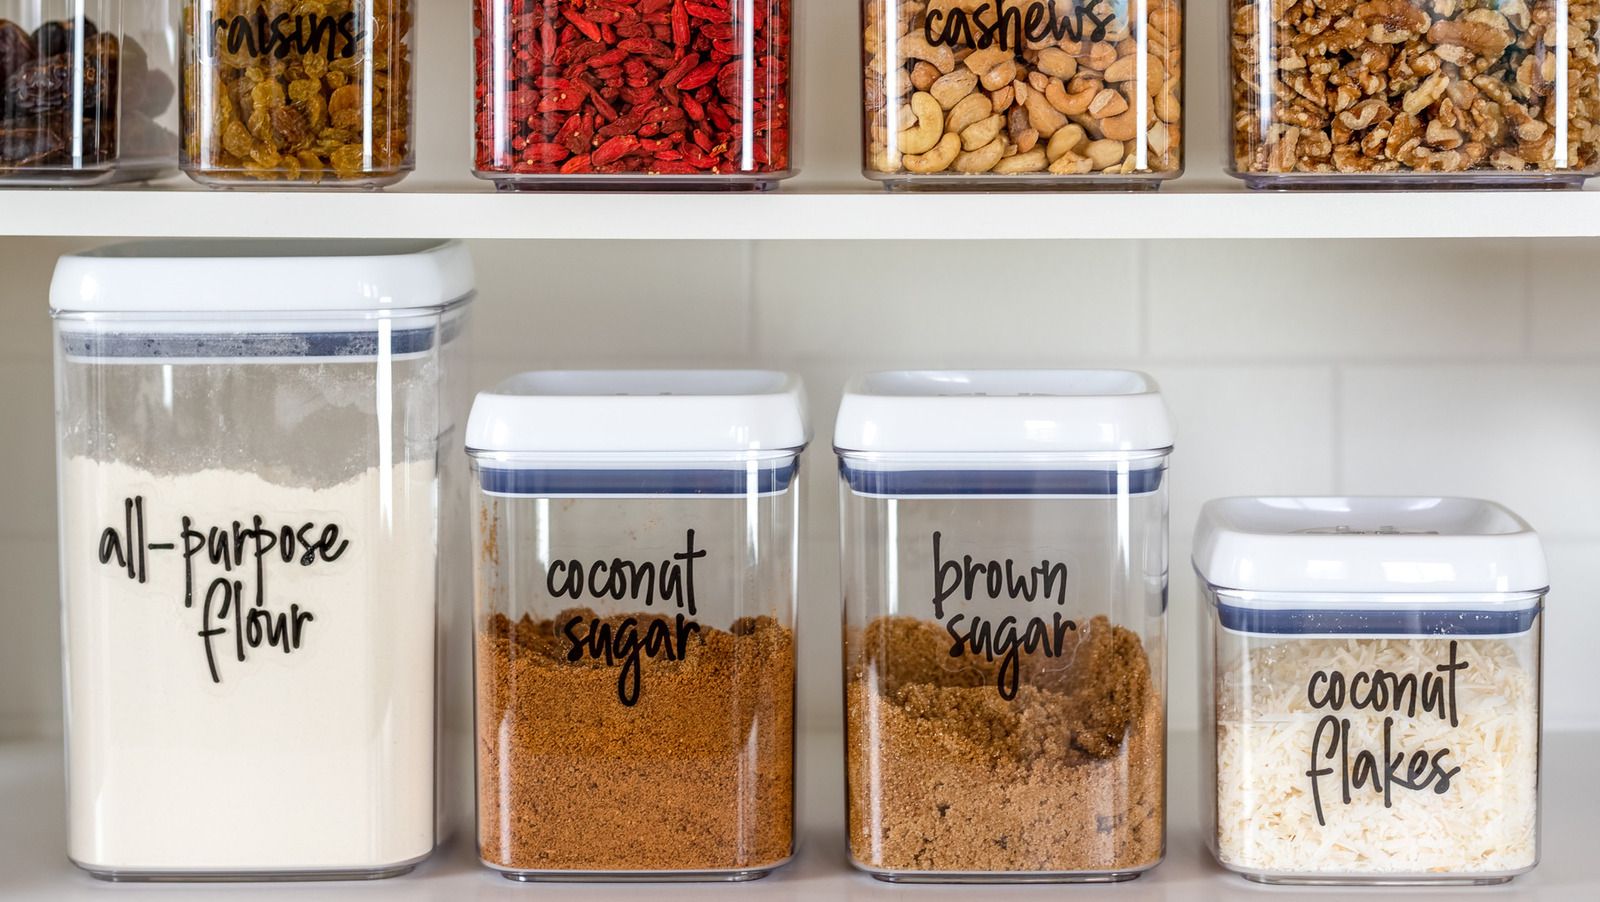 Should You Really Decant Every Pantry Item Into Storage Containers?